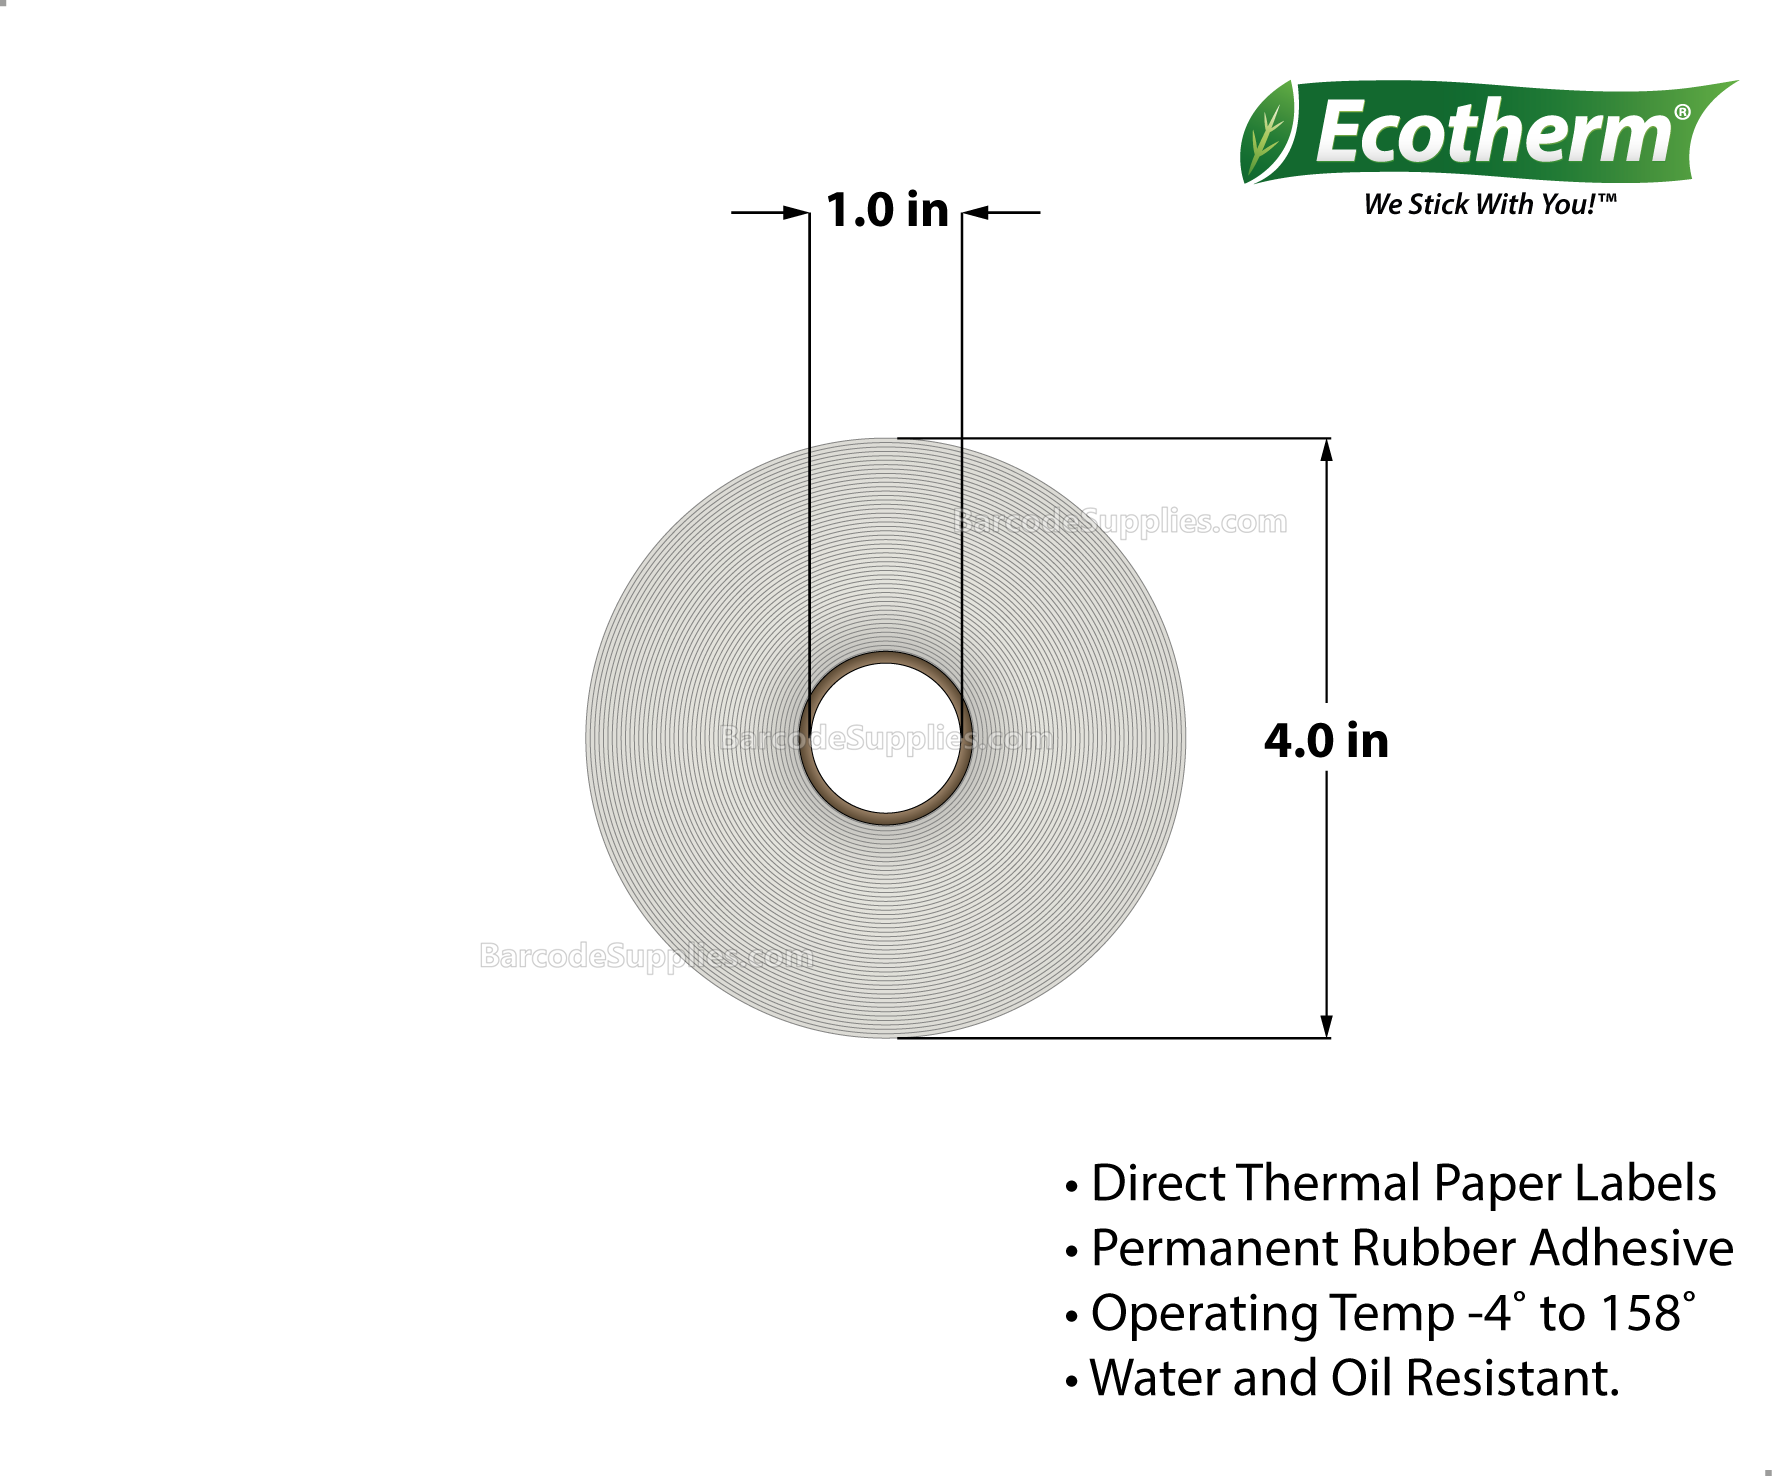 2.25x2.25 Direct Thermal White Labels With Rubber Adhesive - Perforated - 700 Labels Per Roll - Carton Of 4 Rolls - 2800 Labels Total - MPN: ECOTHERM14137-4